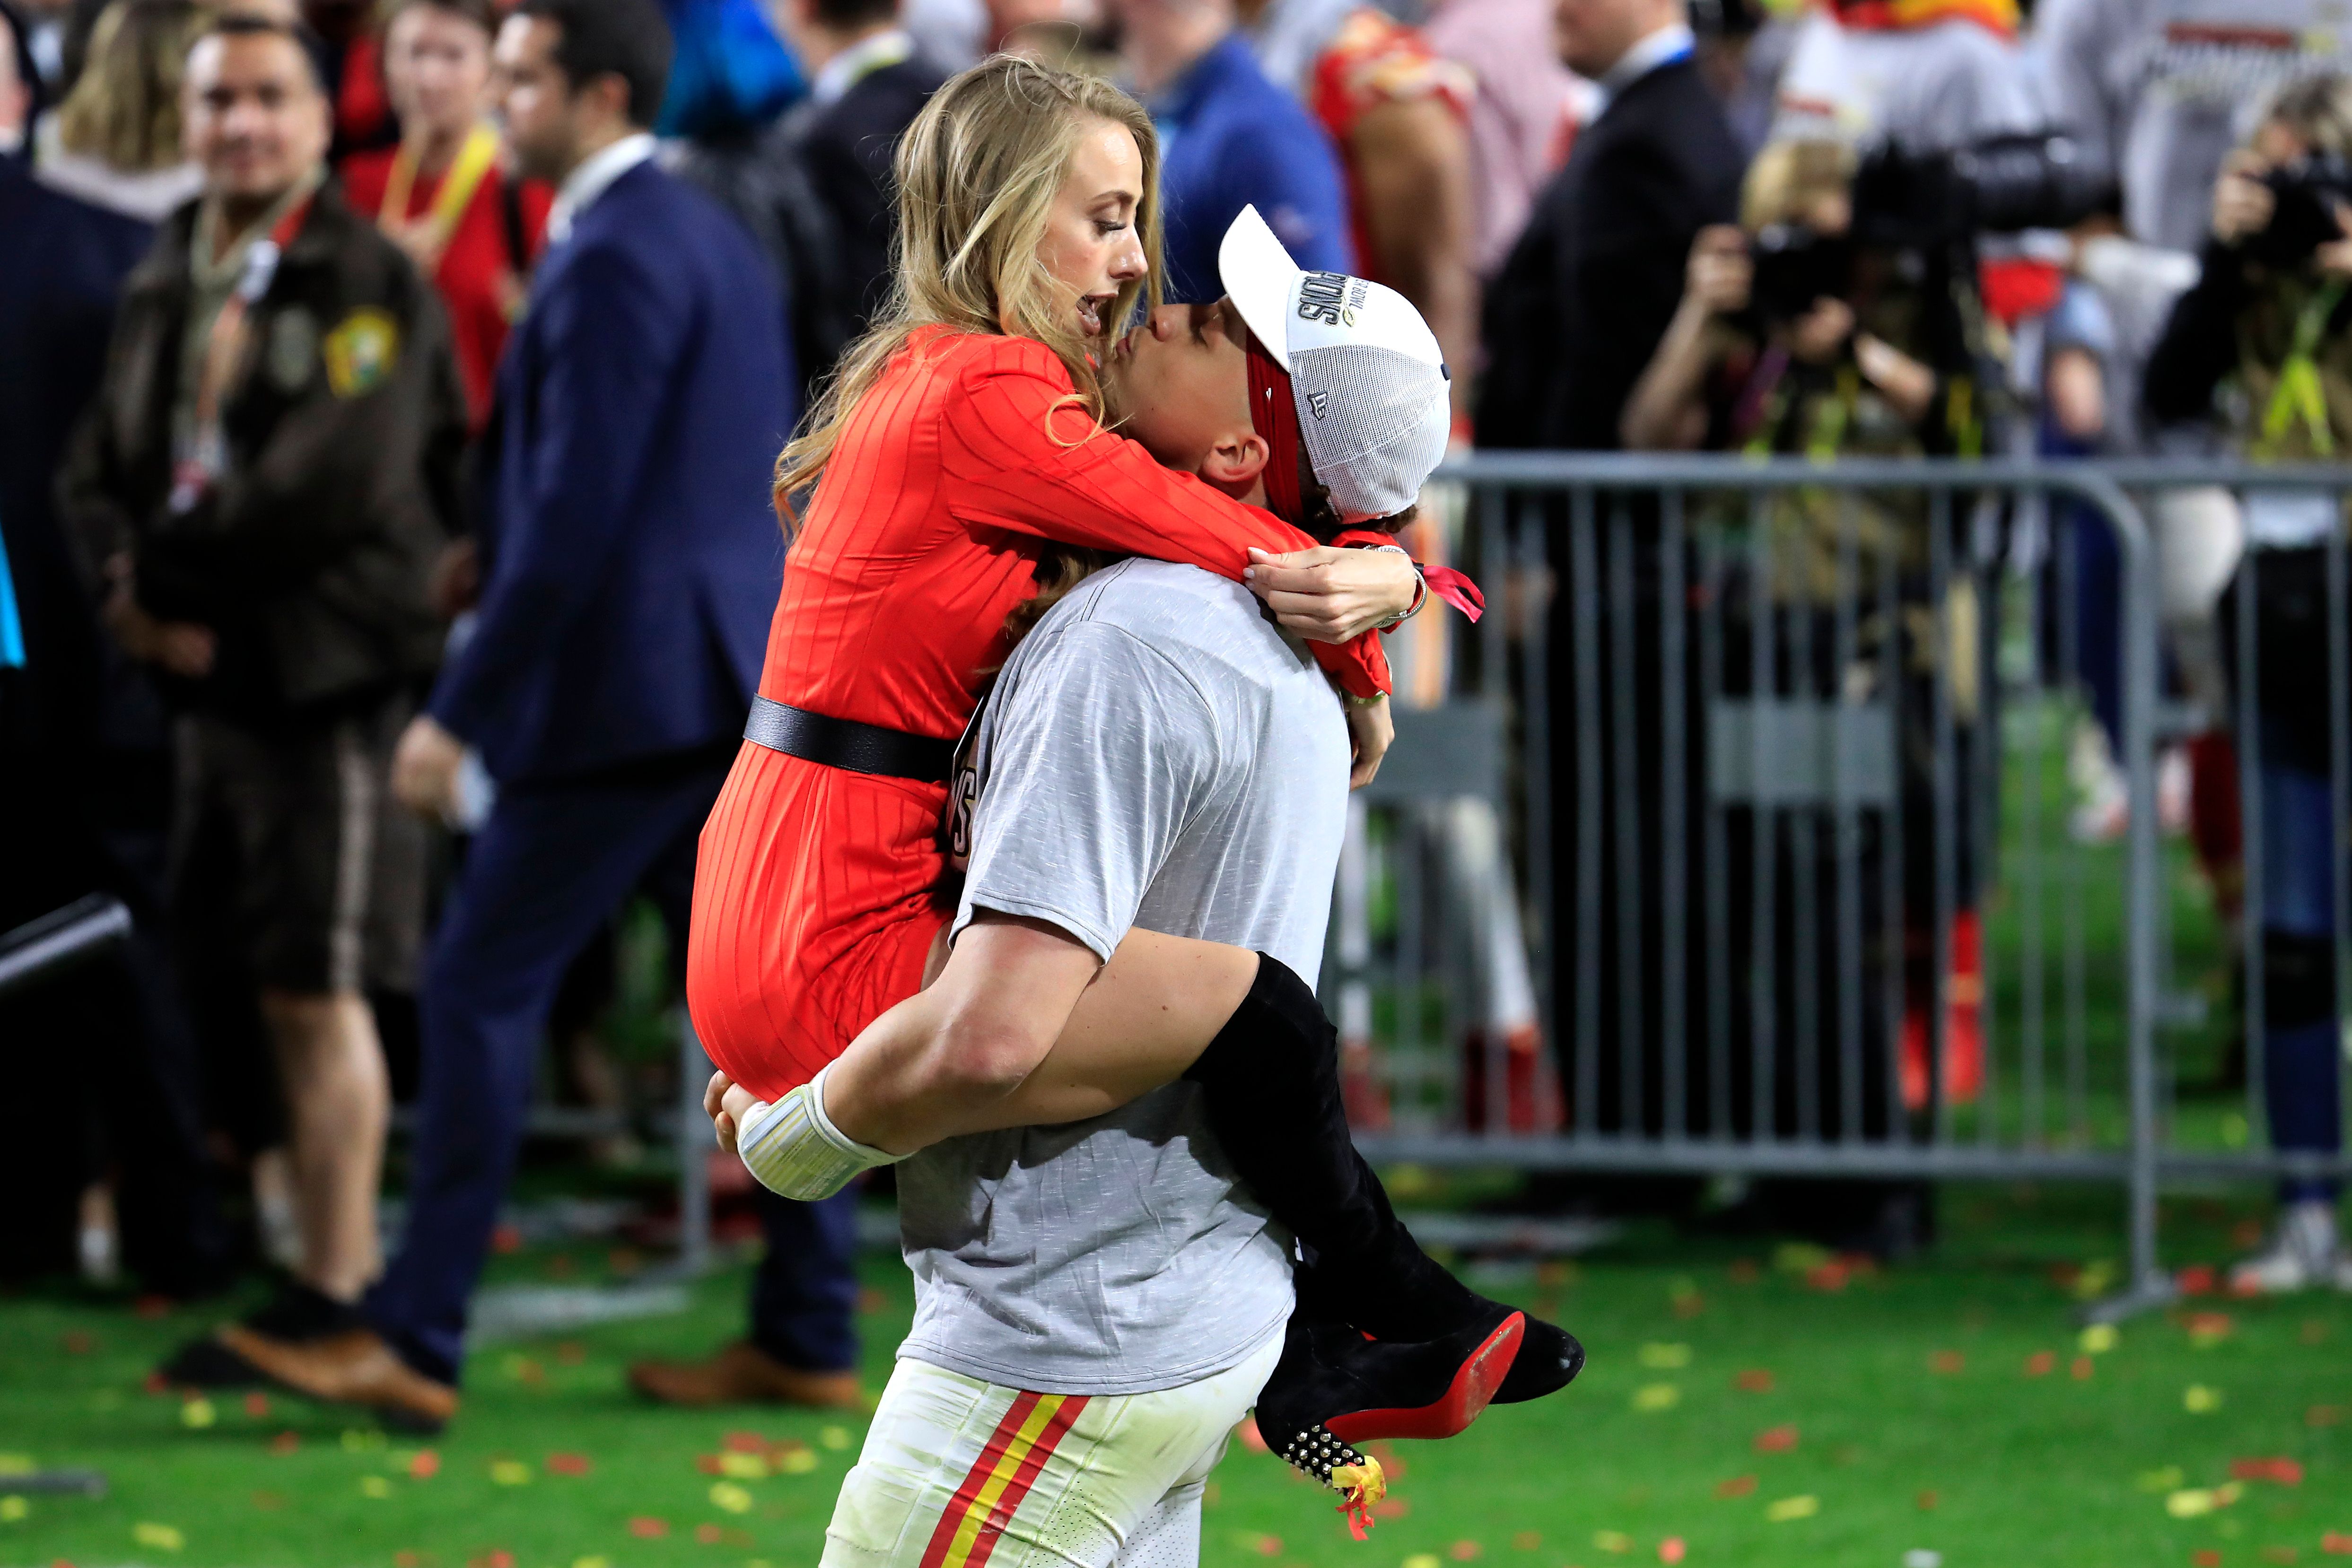 Patrick Mahomes and Brittany Matthews after defeating the San Francisco 49ers in Super Bowl LIV on February 02, 2020, in Miami, Florida. | Source: Getty Images